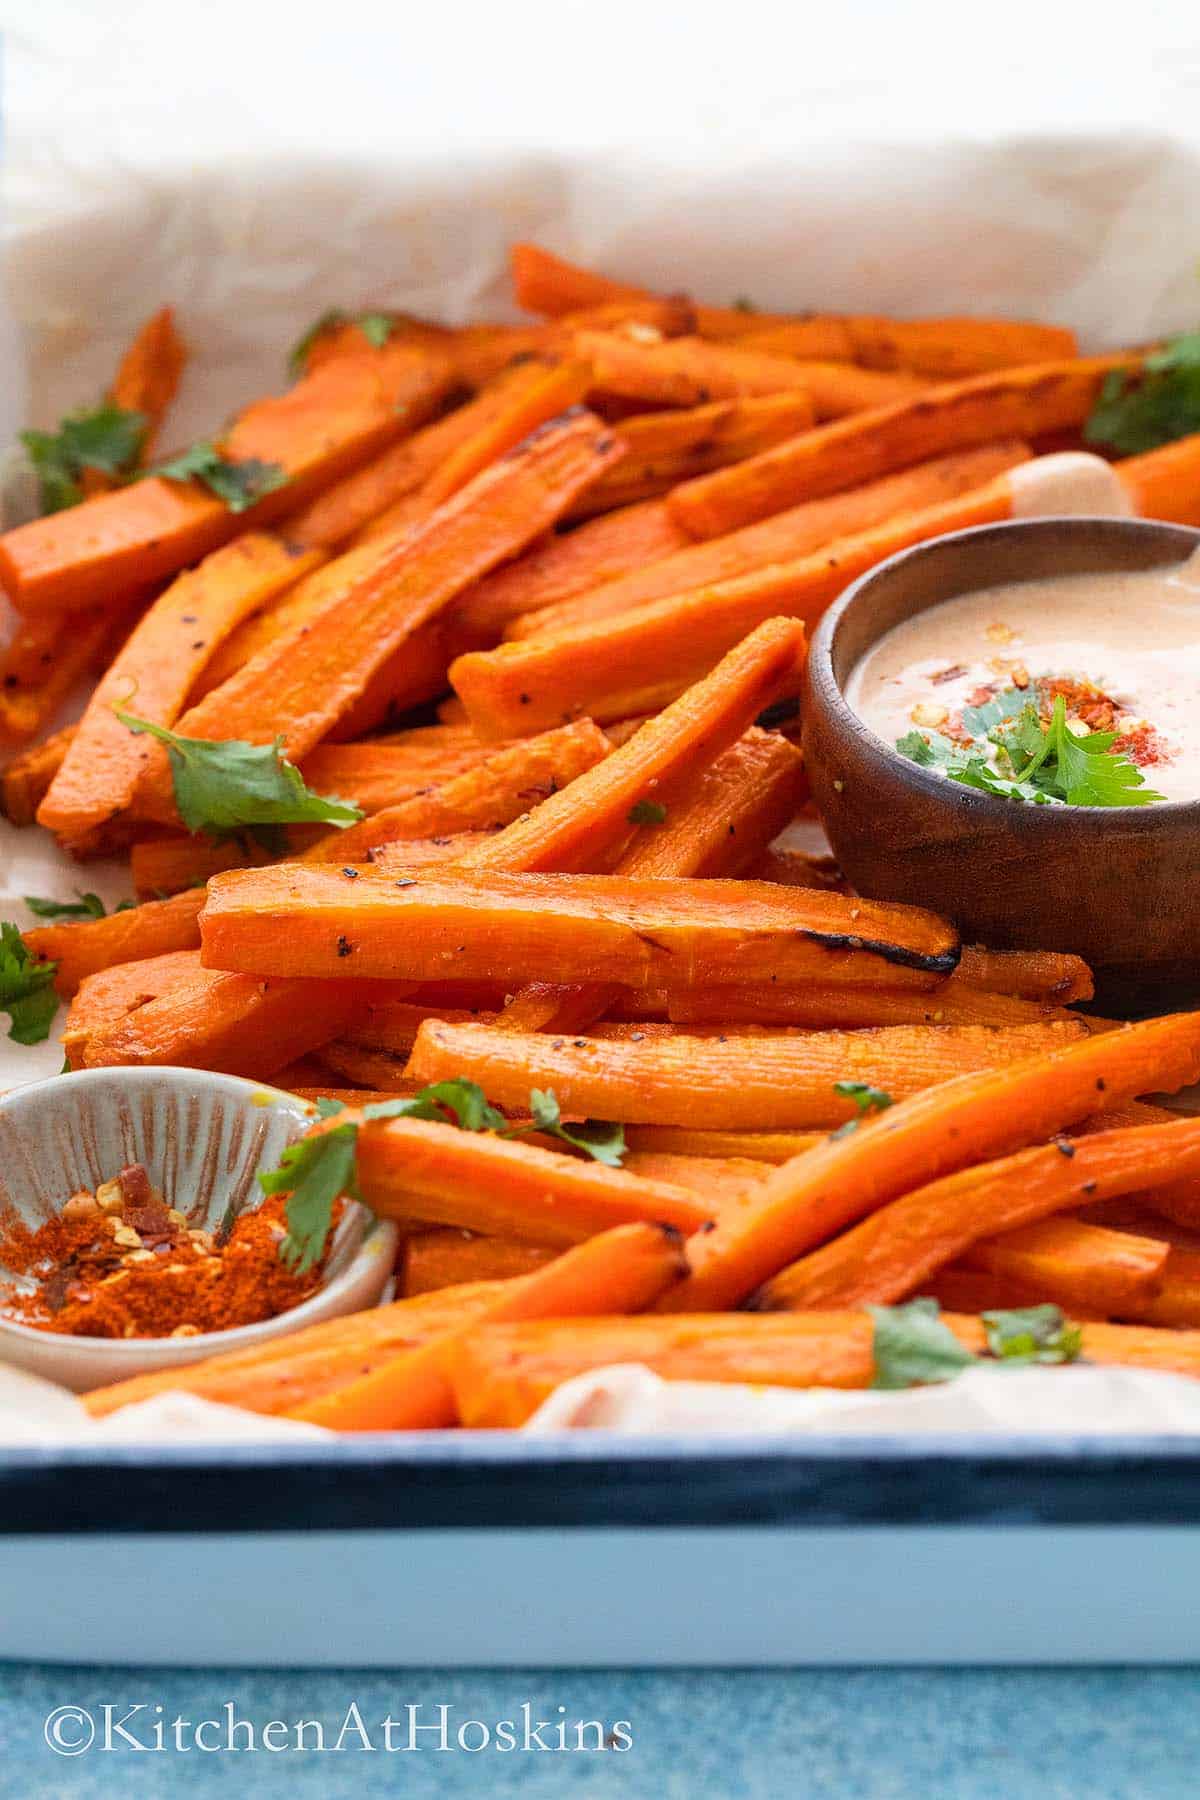 carrot fries roasted in air fryer and served in a white plate.